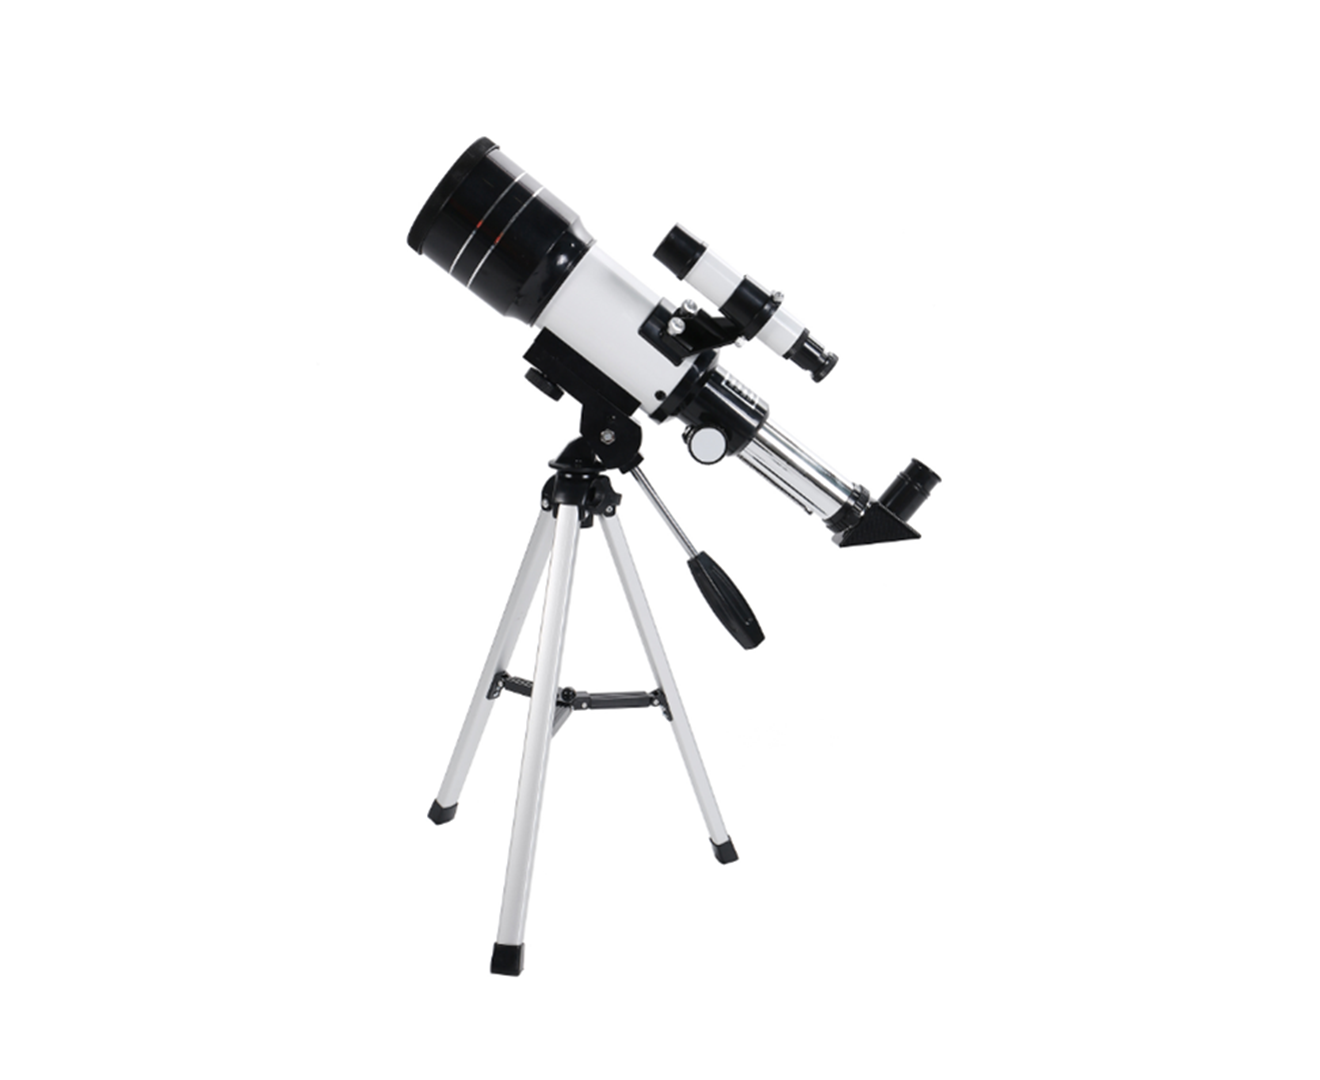 Outdoor High-definition High-powered Astronomical Telescope with Star Finder, Large-aperture Monocular with Tripod